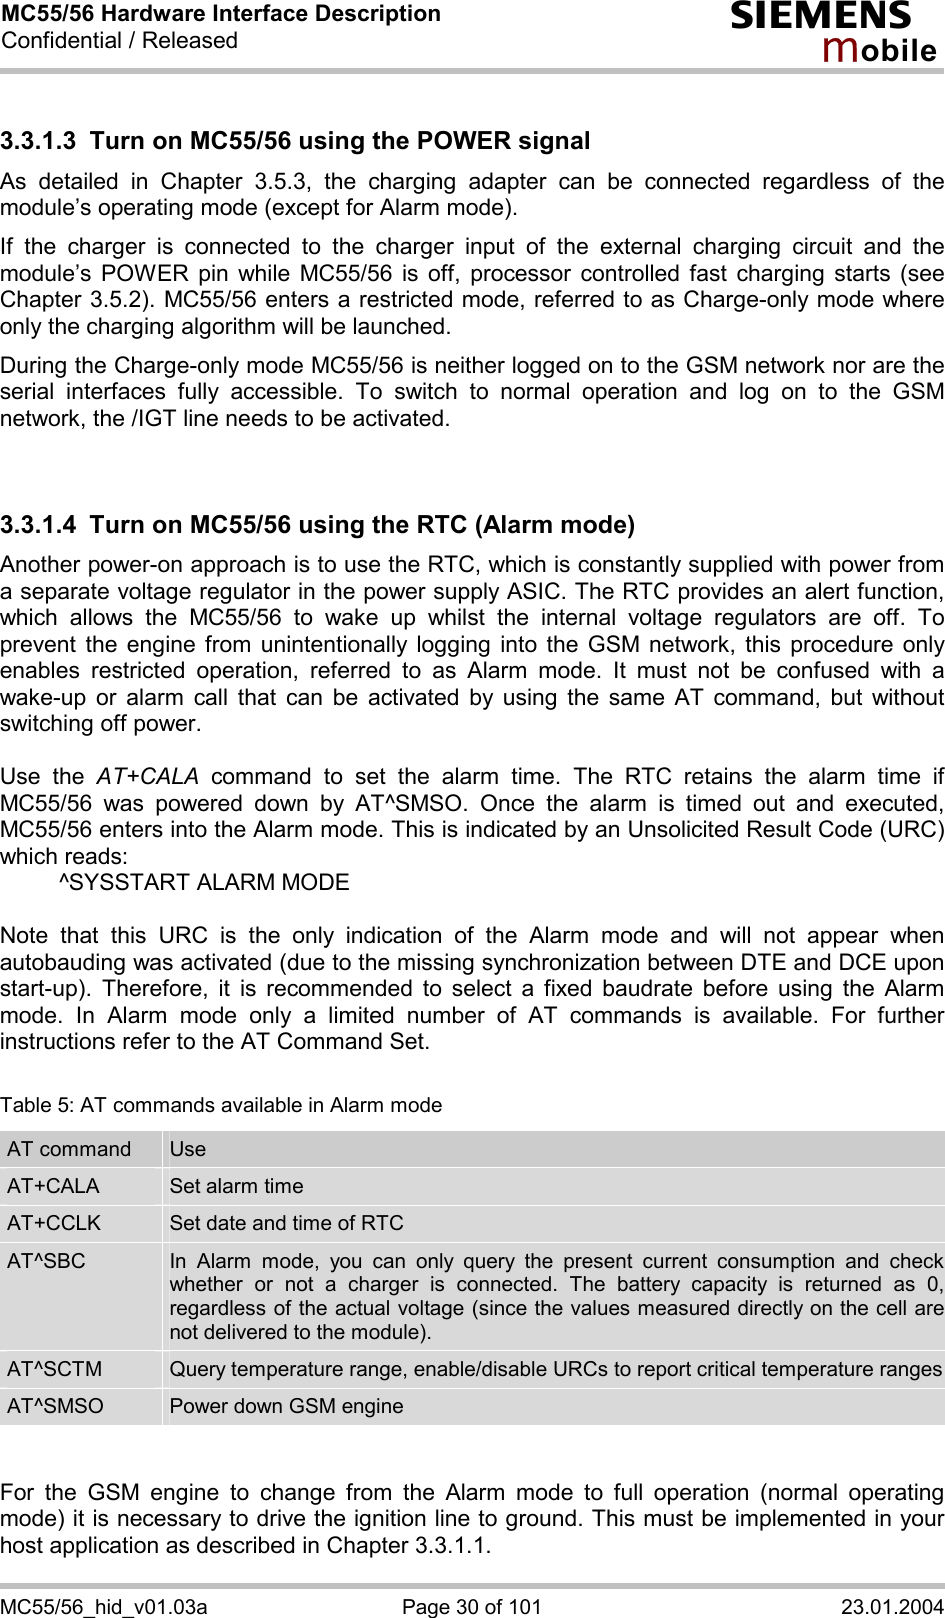 MC55/56 Hardware Interface Description Confidential / Released s mo b i l e MC55/56_hid_v01.03a  Page 30 of 101  23.01.2004 3.3.1.3  Turn on MC55/56 using the POWER signal As detailed in Chapter 3.5.3, the charging adapter can be connected regardless of the module’s operating mode (except for Alarm mode).  If the charger is connected to the charger input of the external charging circuit and the module’s POWER pin while MC55/56 is off, processor controlled fast charging starts (see Chapter 3.5.2). MC55/56 enters a restricted mode, referred to as Charge-only mode where only the charging algorithm will be launched. During the Charge-only mode MC55/56 is neither logged on to the GSM network nor are the serial interfaces fully accessible. To switch to normal operation and log on to the GSM network, the /IGT line needs to be activated.   3.3.1.4  Turn on MC55/56 using the RTC (Alarm mode) Another power-on approach is to use the RTC, which is constantly supplied with power from a separate voltage regulator in the power supply ASIC. The RTC provides an alert function, which allows the MC55/56 to wake up whilst the internal voltage regulators are off. To prevent the engine from unintentionally logging into the GSM network, this procedure only enables restricted operation, referred to as Alarm mode. It must not be confused with a wake-up or alarm call that can be activated by using the same AT command, but without switching off power.  Use the AT+CALA command to set the alarm time. The RTC retains the alarm time if MC55/56 was powered down by AT^SMSO. Once the alarm is timed out and executed, MC55/56 enters into the Alarm mode. This is indicated by an Unsolicited Result Code (URC) which reads:   ^SYSSTART ALARM MODE    Note that this URC is the only indication of the Alarm mode and will not appear when autobauding was activated (due to the missing synchronization between DTE and DCE upon start-up). Therefore, it is recommended to select a fixed baudrate before using the Alarm mode. In Alarm mode only a limited number of AT commands is available. For further instructions refer to the AT Command Set.  Table 5: AT commands available in Alarm mode AT command  Use AT+CALA  Set alarm time AT+CCLK  Set date and time of RTC AT^SBC  In Alarm mode, you can only query the present current consumption and check whether or not a charger is connected. The battery capacity is returned as 0, regardless of the actual voltage (since the values measured directly on the cell are not delivered to the module). AT^SCTM  Query temperature range, enable/disable URCs to report critical temperature rangesAT^SMSO  Power down GSM engine   For the GSM engine to change from the Alarm mode to full operation (normal operating mode) it is necessary to drive the ignition line to ground. This must be implemented in your host application as described in Chapter 3.3.1.1. 